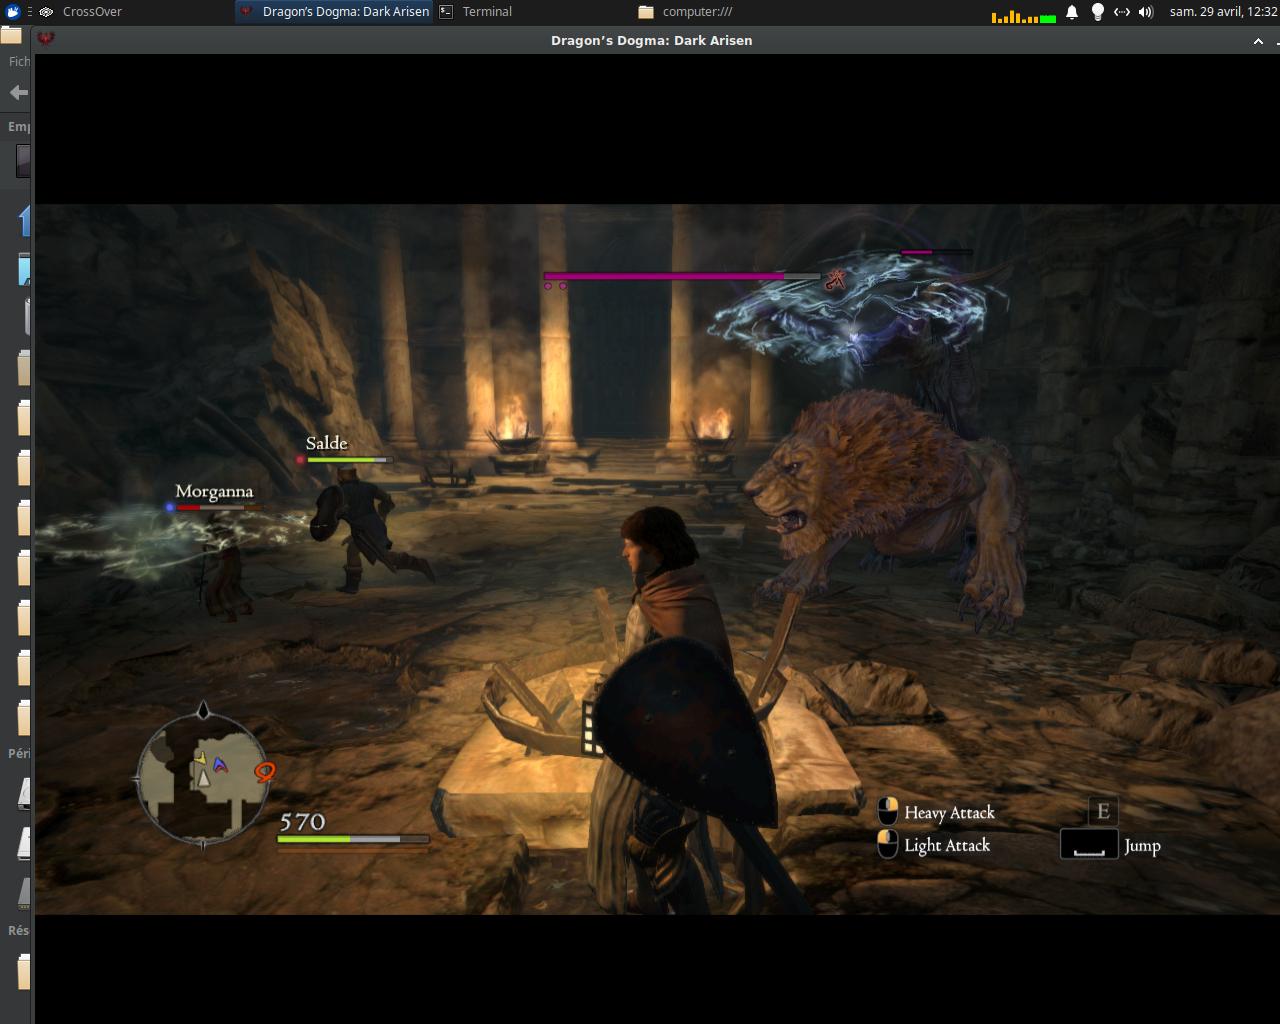 Dragon's Dogma 2 - Developer Gameplay Overview